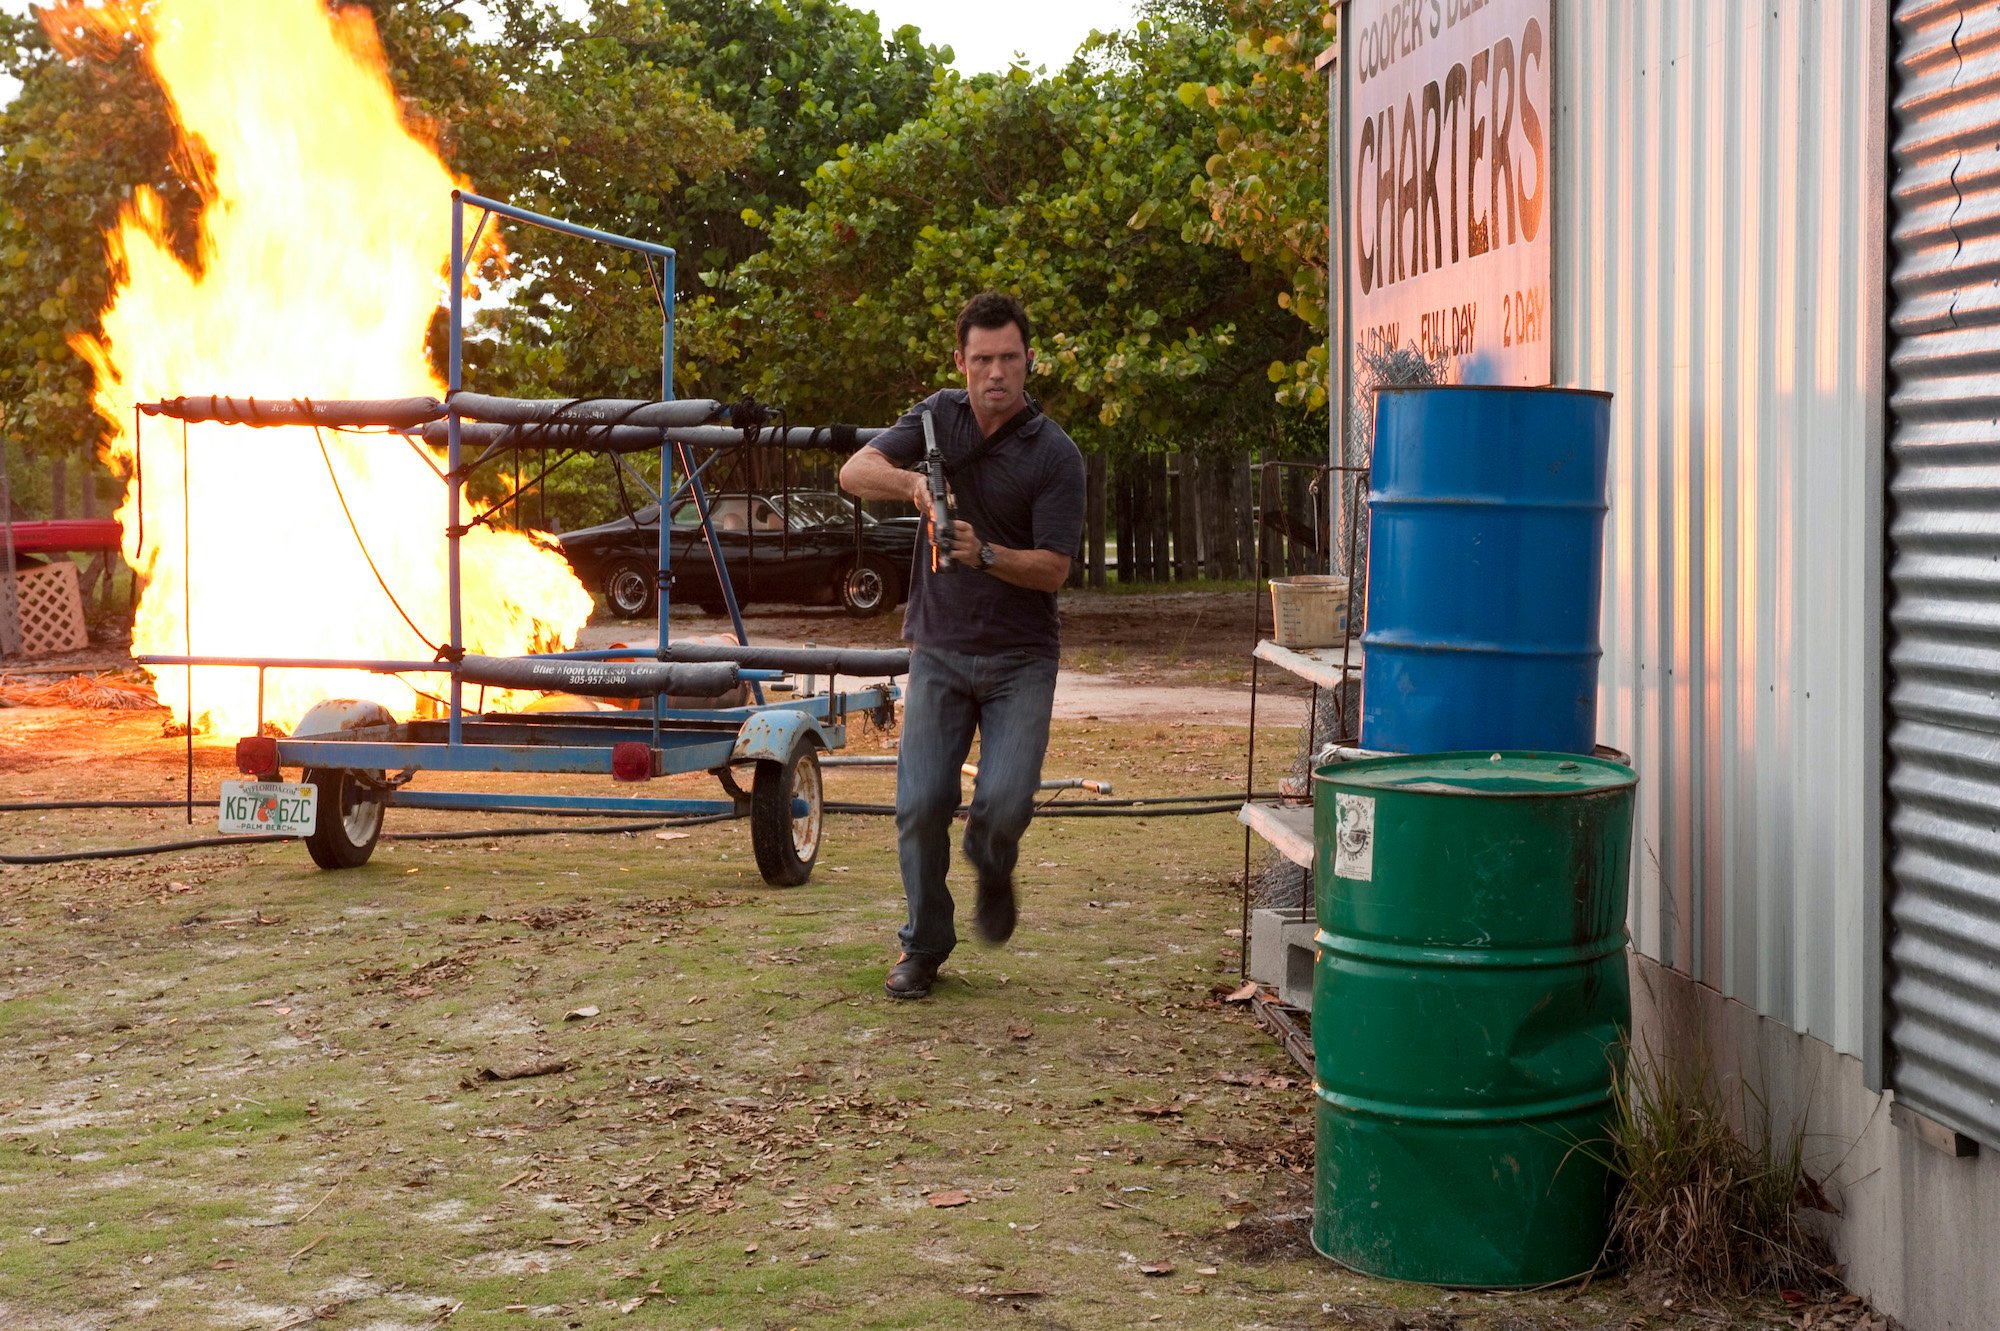 Jeffrey Donovan on 'Burn Notice' running around with a fire in the background